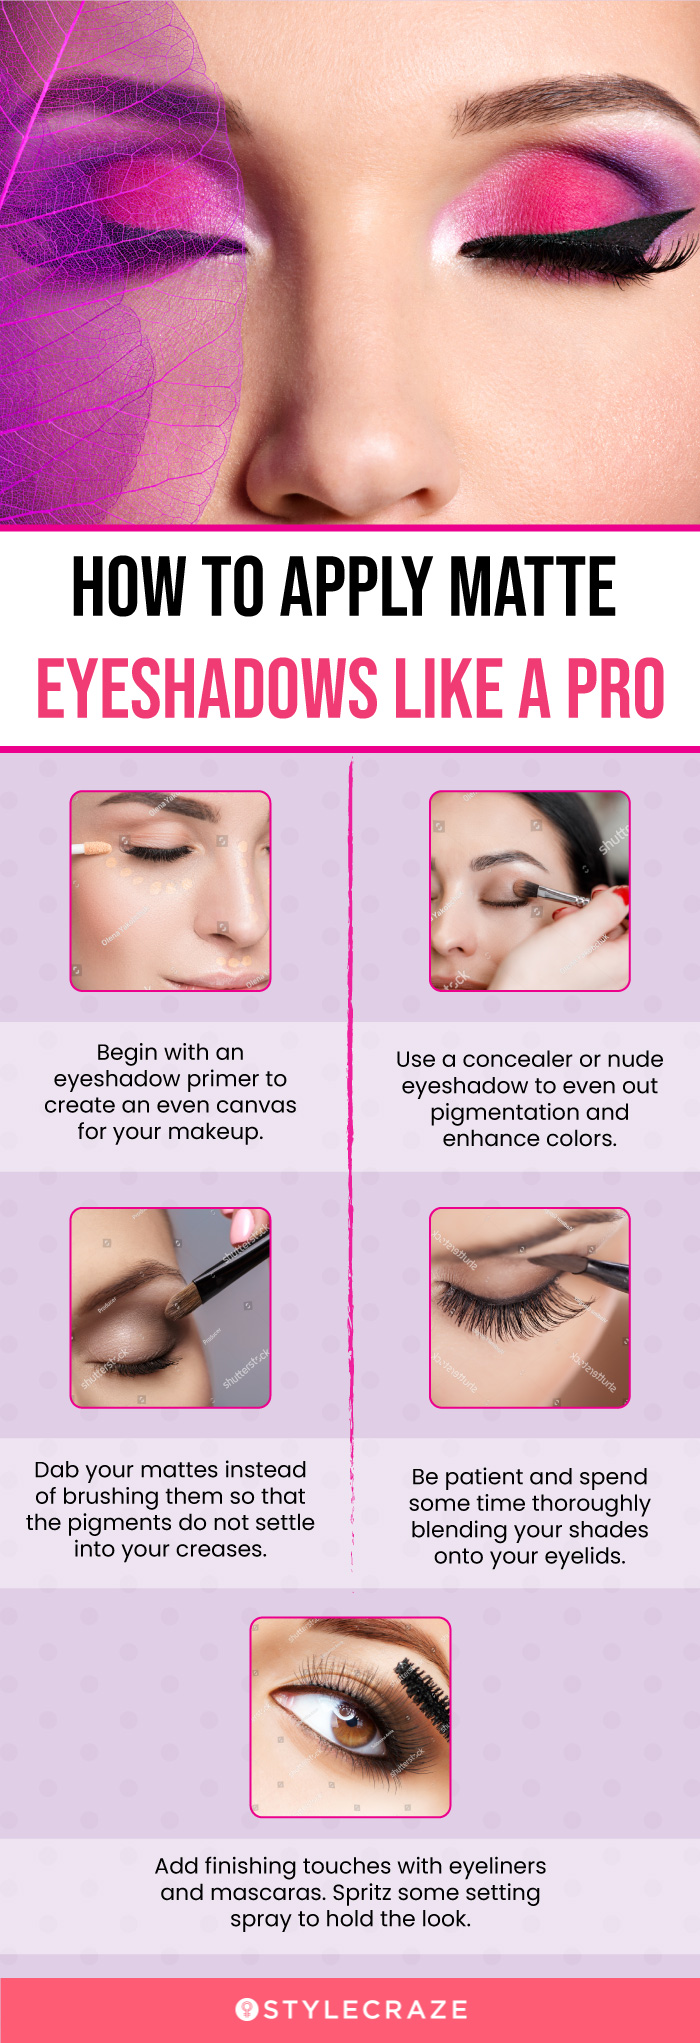 How To Apply Matte Eyeshadows Like A Pro (infographic)